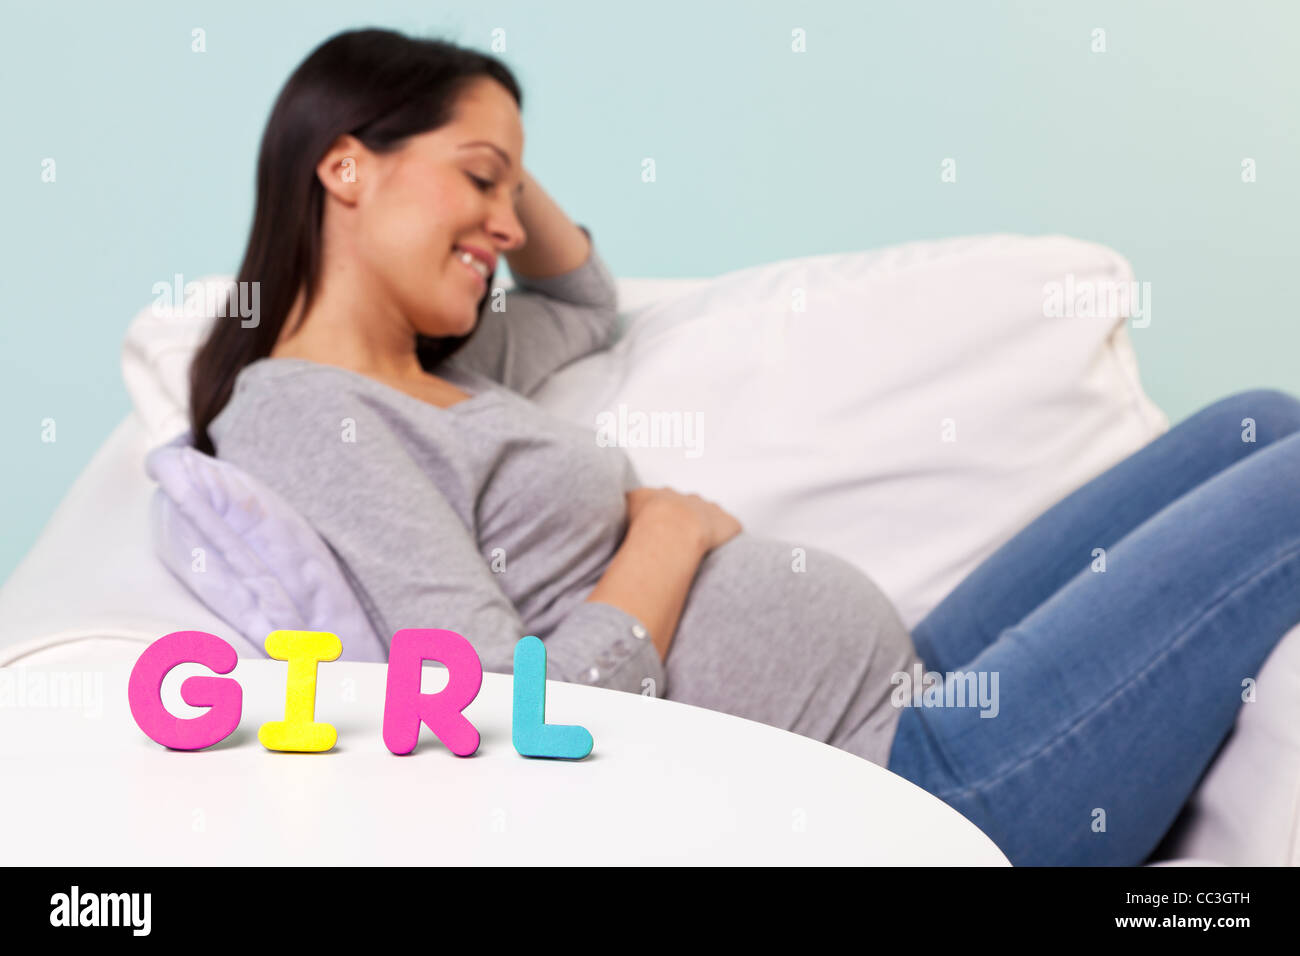 Photo of a pregnant woman at home sitting in an armchair, focus on the word GIRL on the table in front. Stock Photo